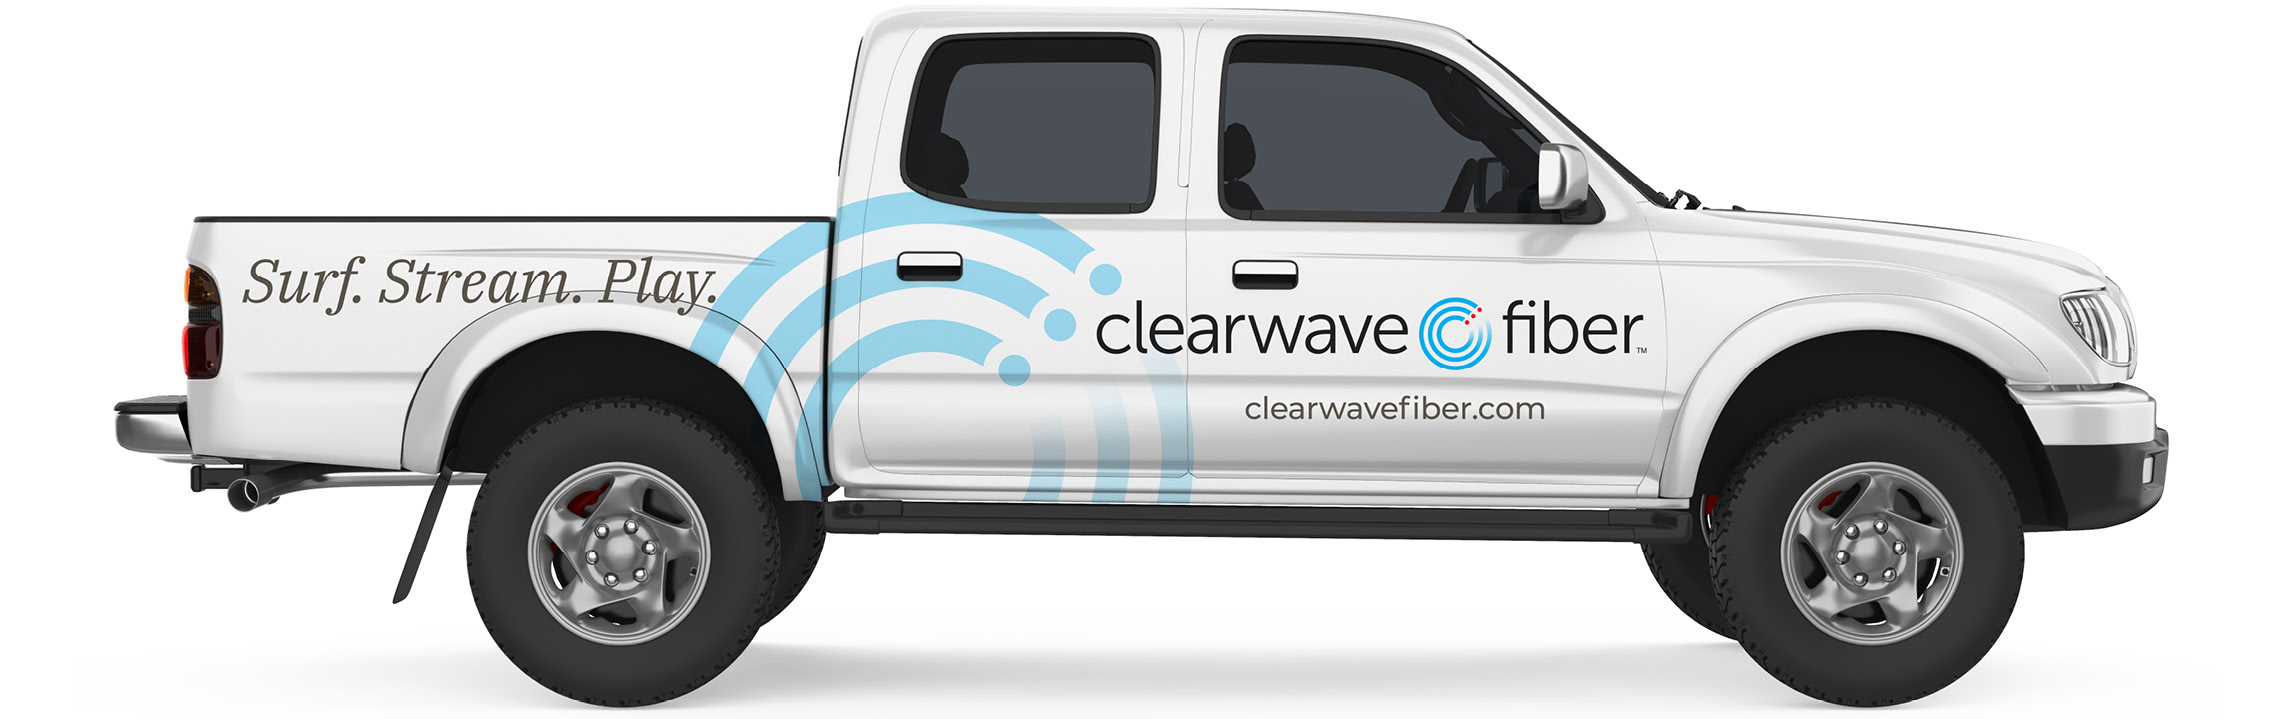 Clearewave Fiber business truck with side decals